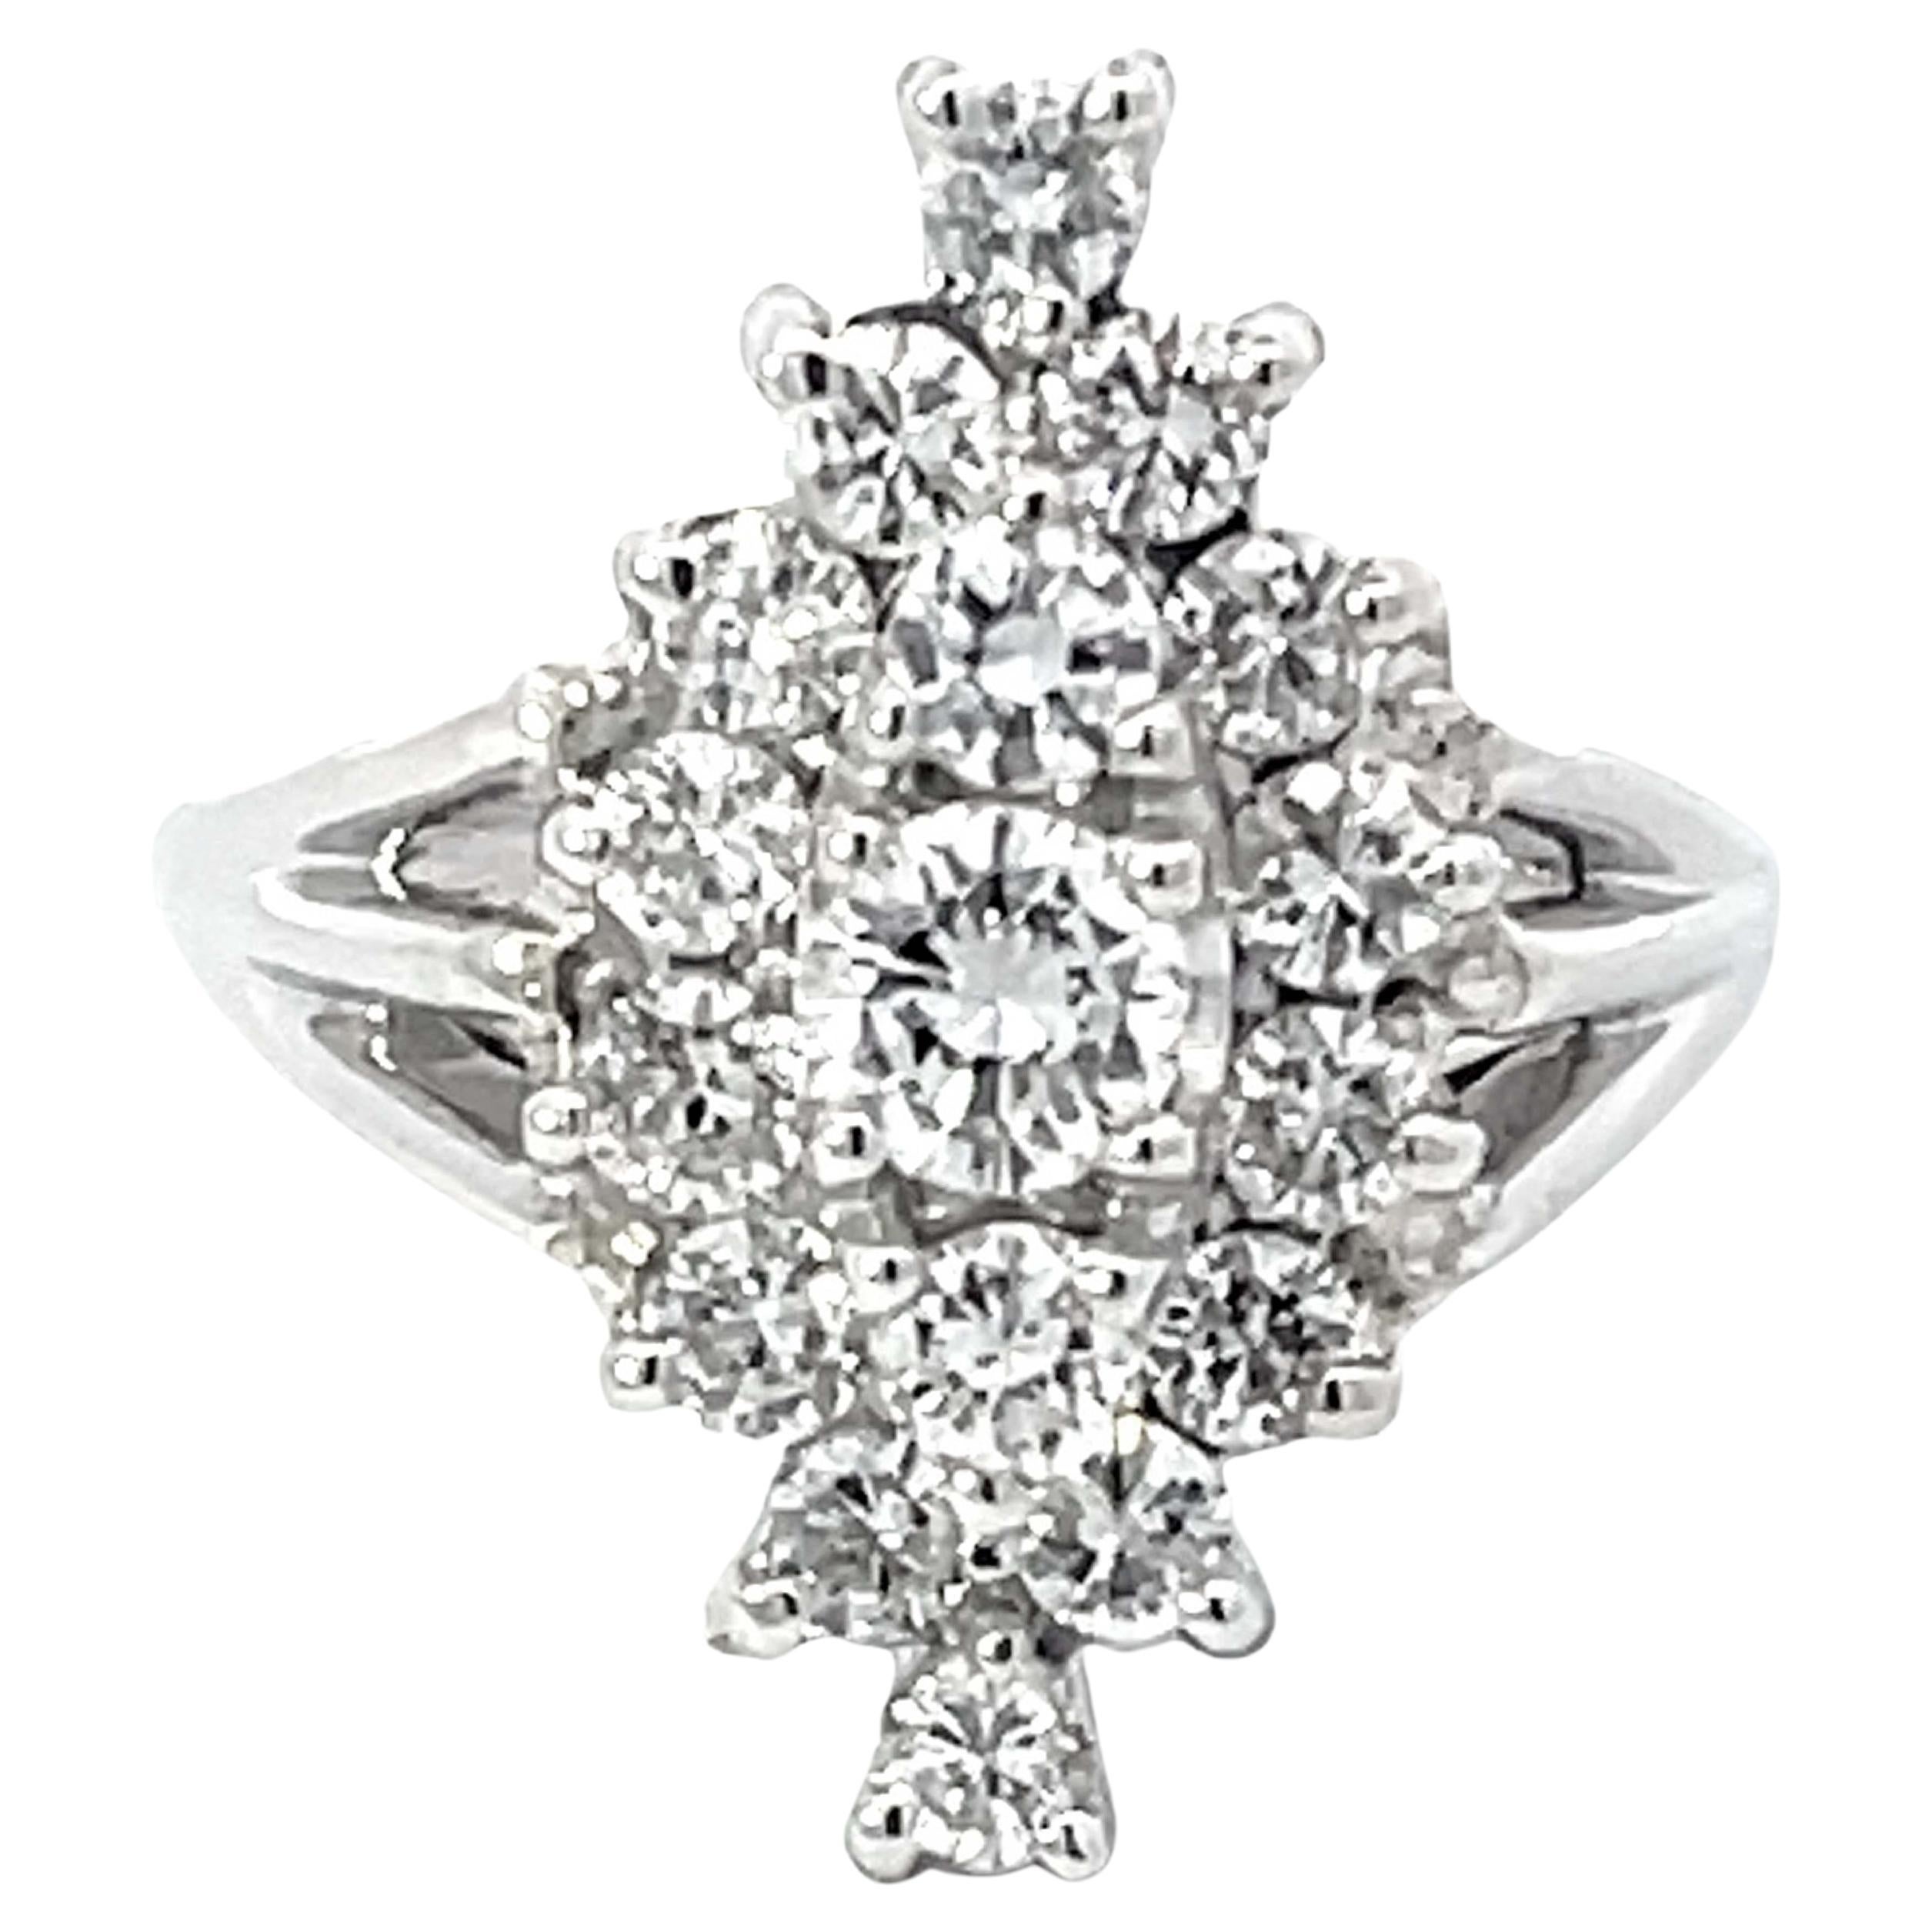 Edwardian 7 Diamond Cluster Ring with Scalloped Setting in 14k White ...